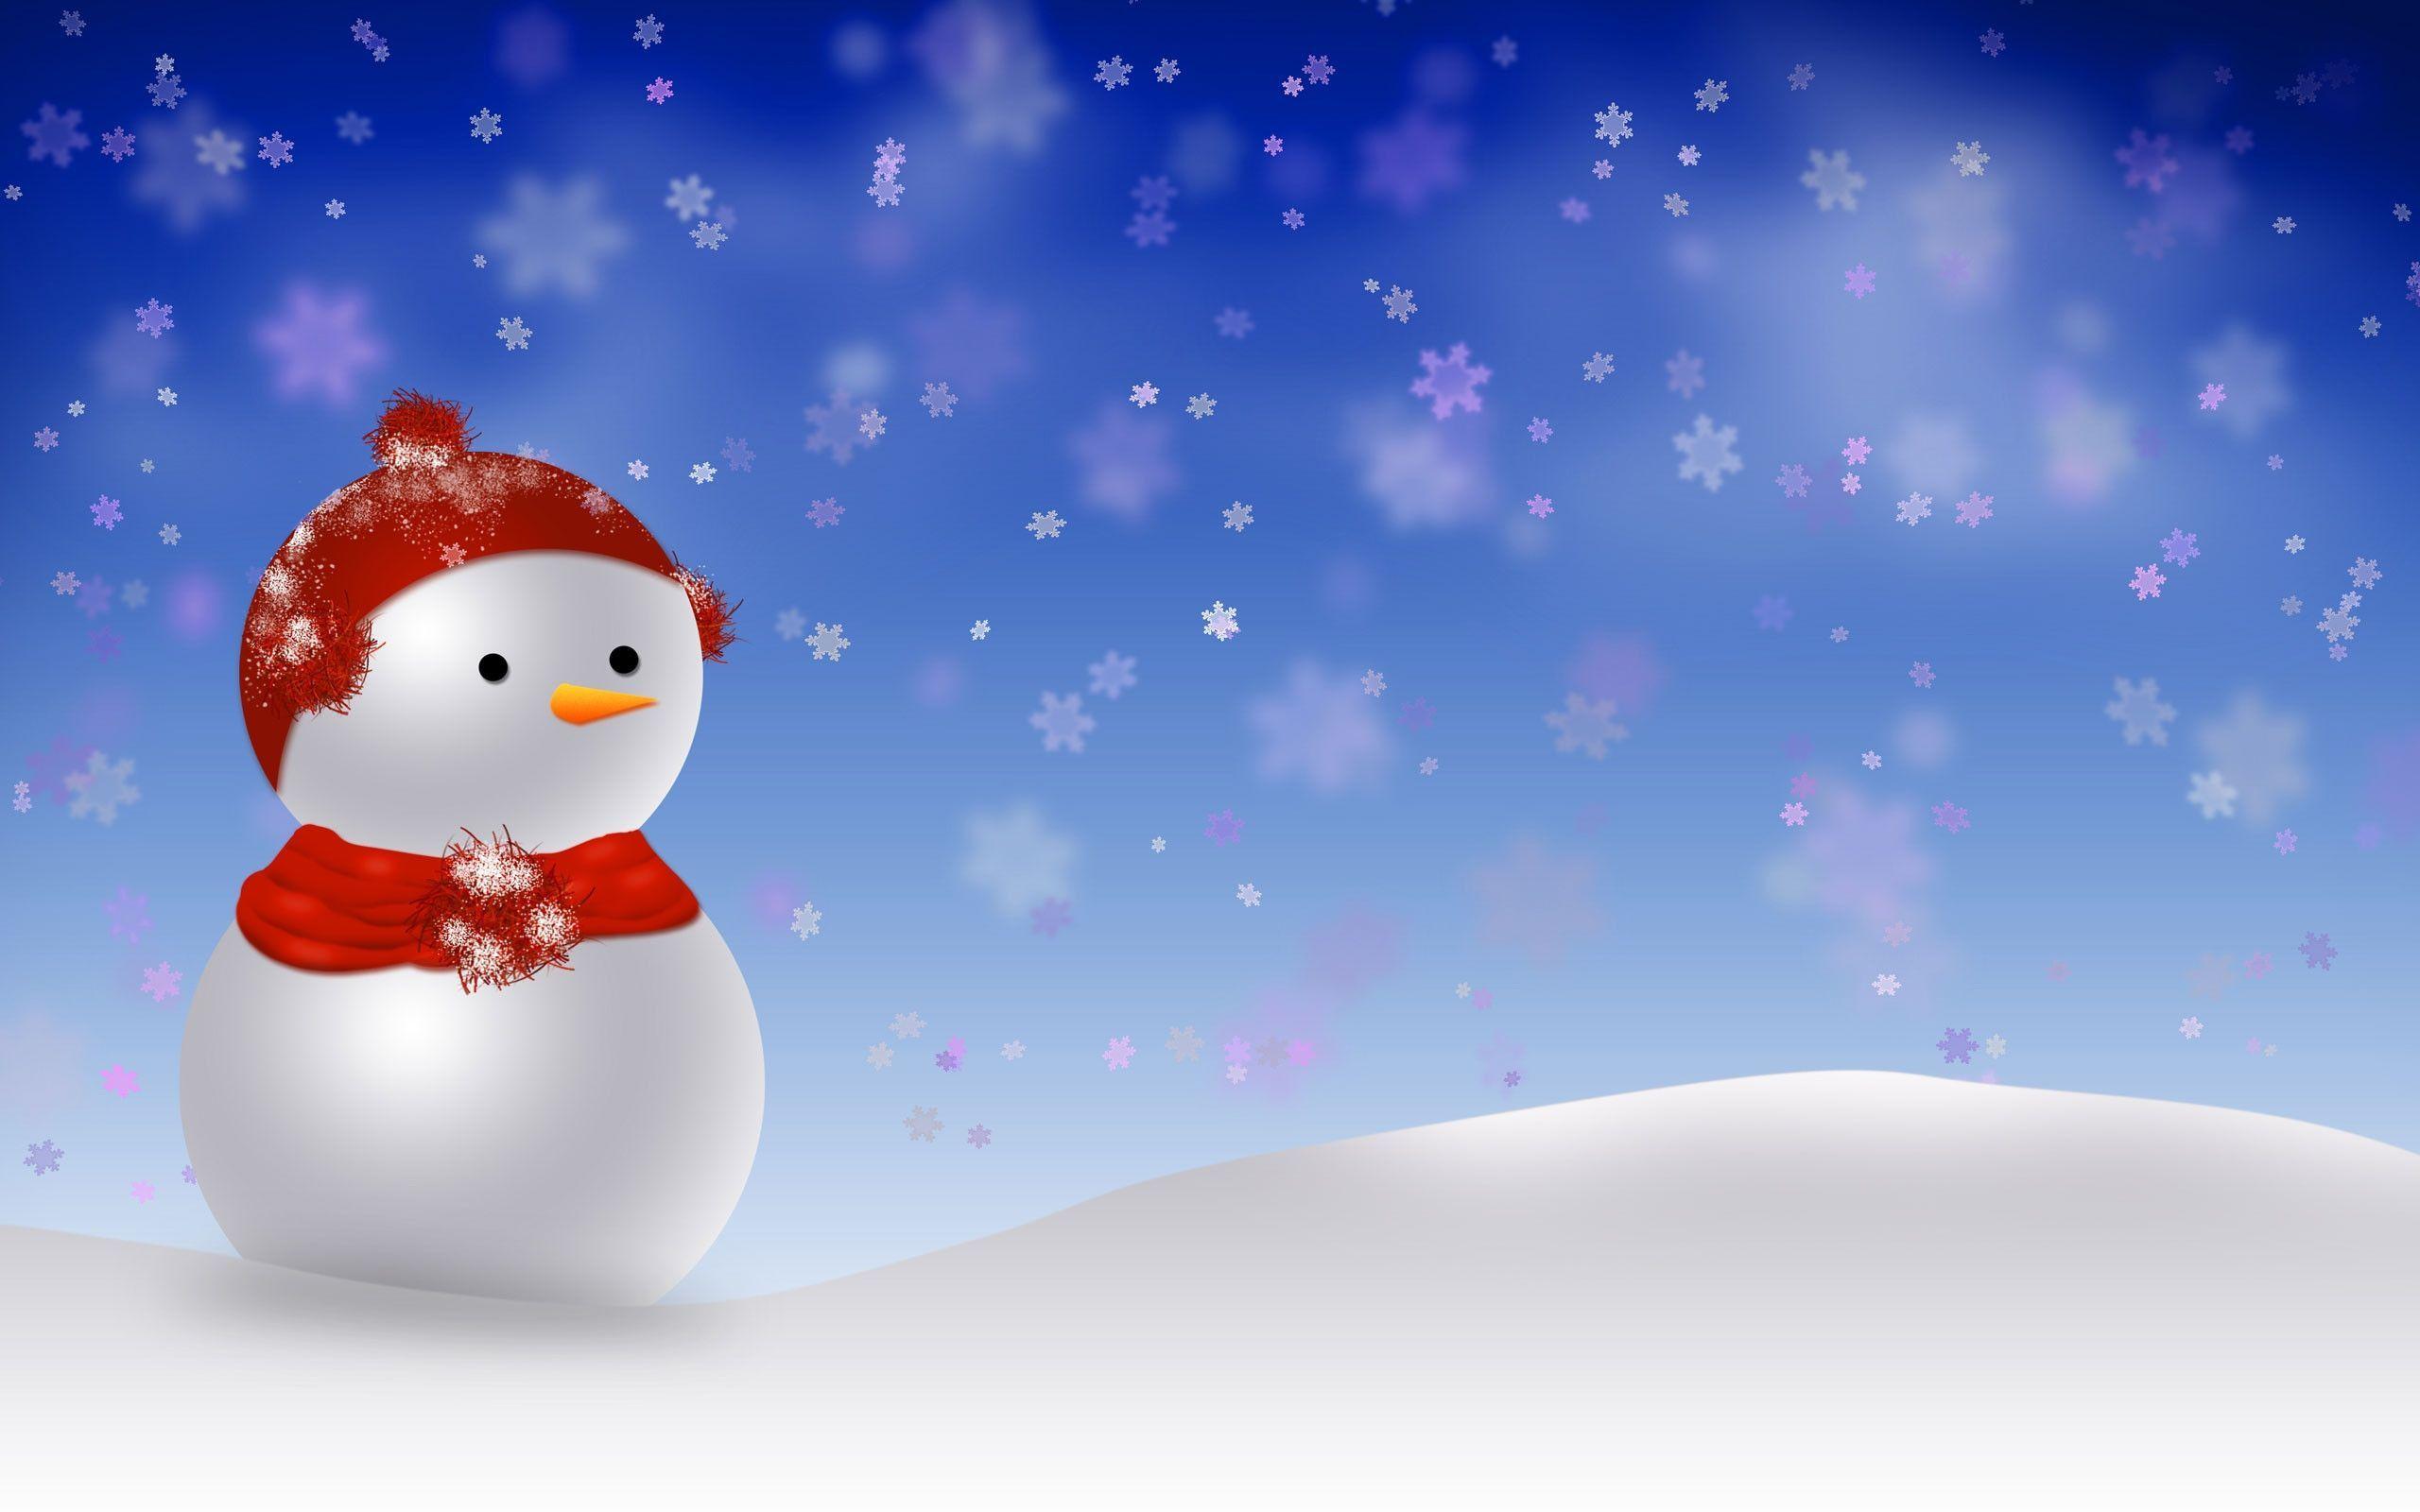 Cute Animated Merry Christmas Wallpaper Image & Picture